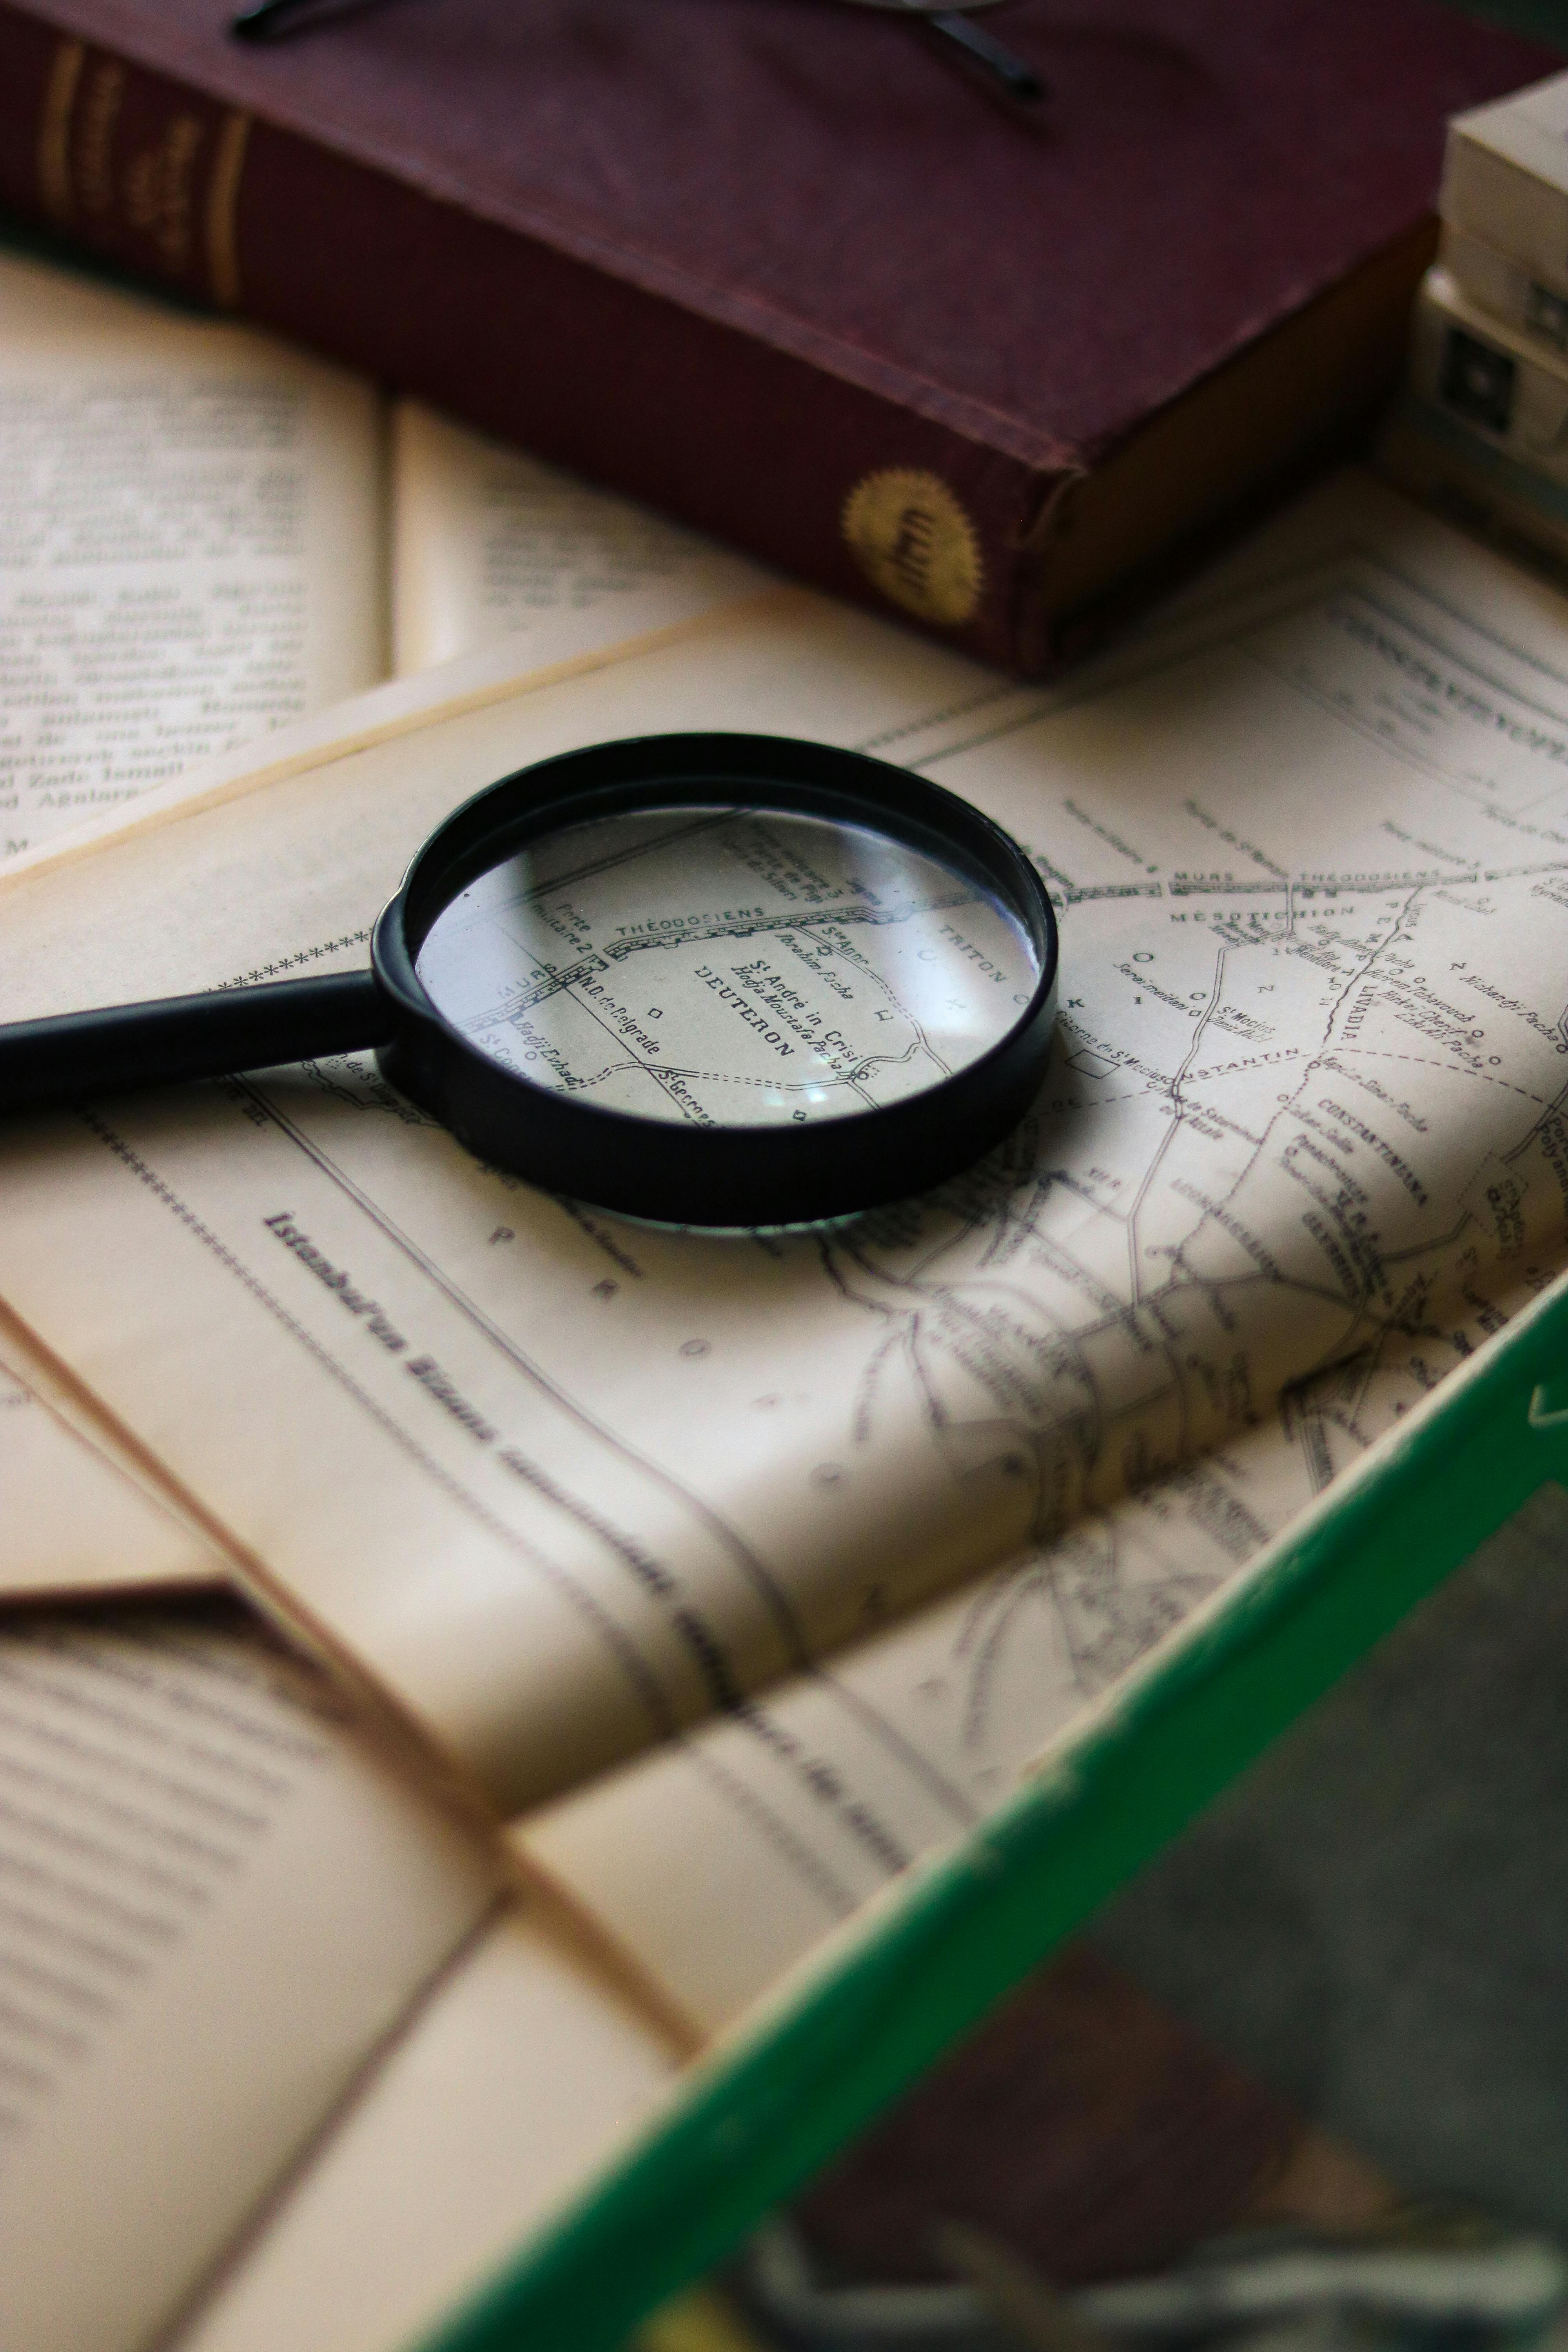 Vintage book and magnifying glass on wooden desk Stock Photo by rawf8